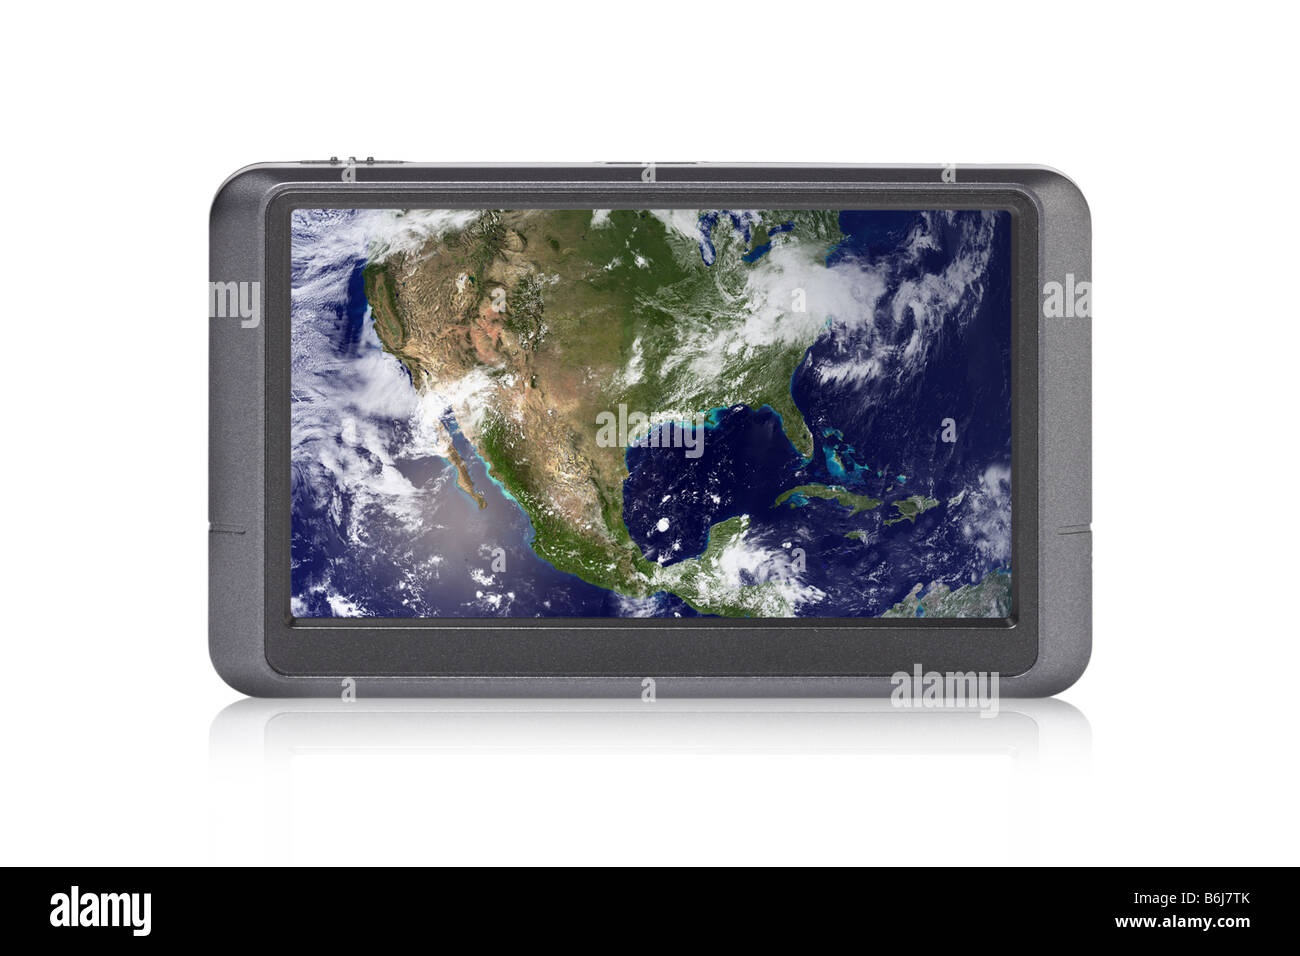 Portable GPS device earth image on screen cutout on white background Stock Photo